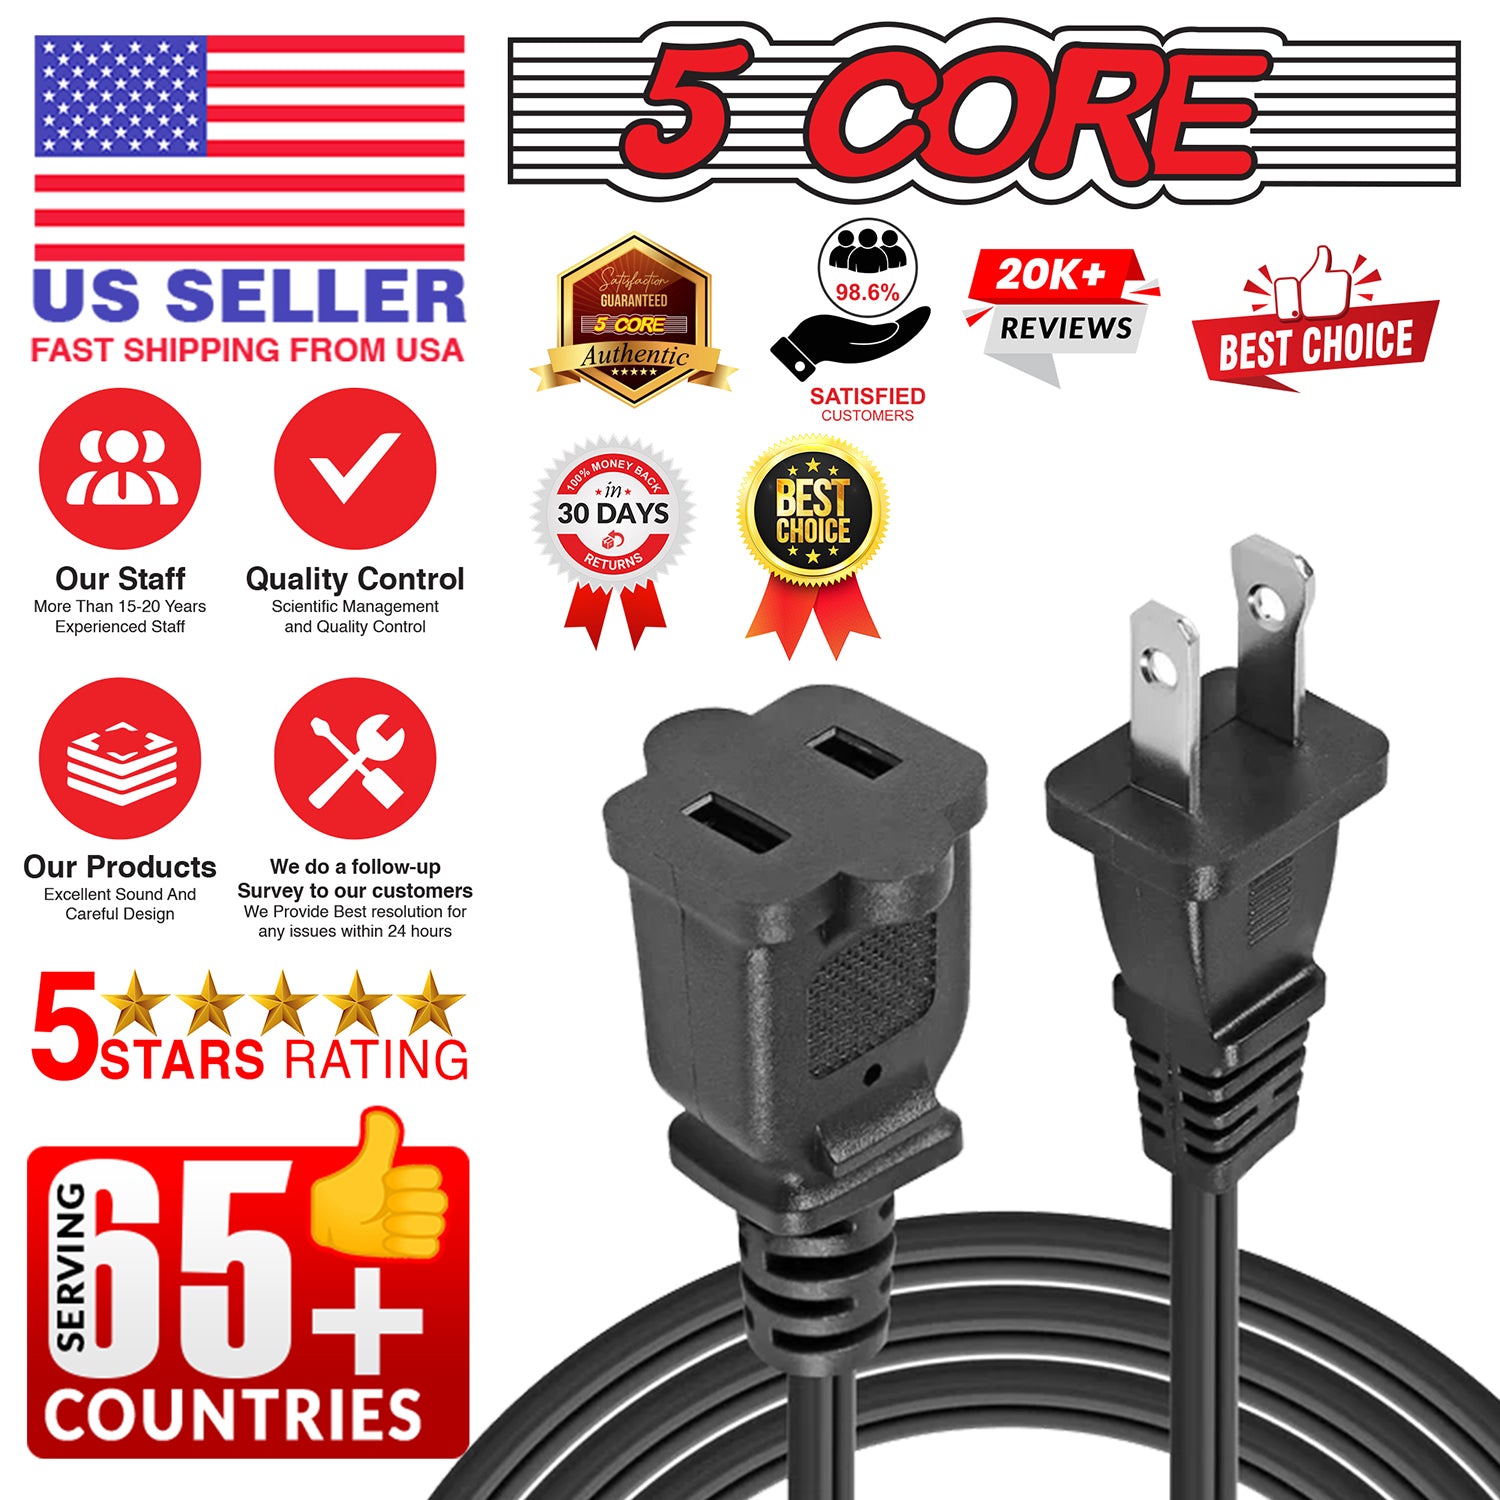 5 Core AC Power Cord 12 Ft US Polarized Male to Female 2 Prong Extension Adapter Cords 16AWG 125V 1/2/3 Pc